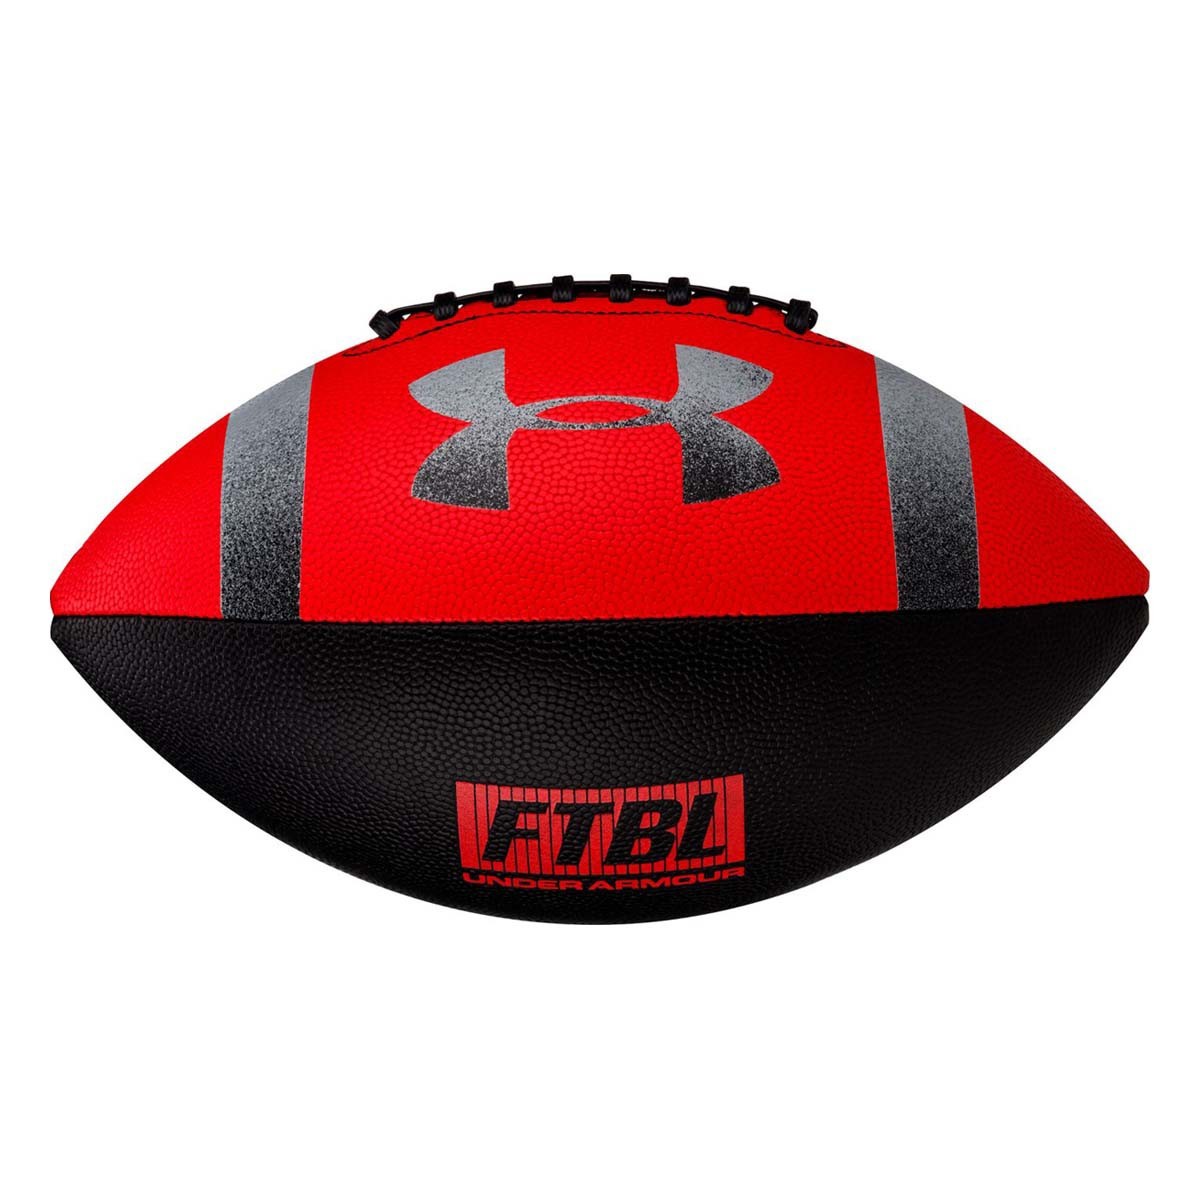 Under Armour 295 Composite Football Official - Forelle Teamsports